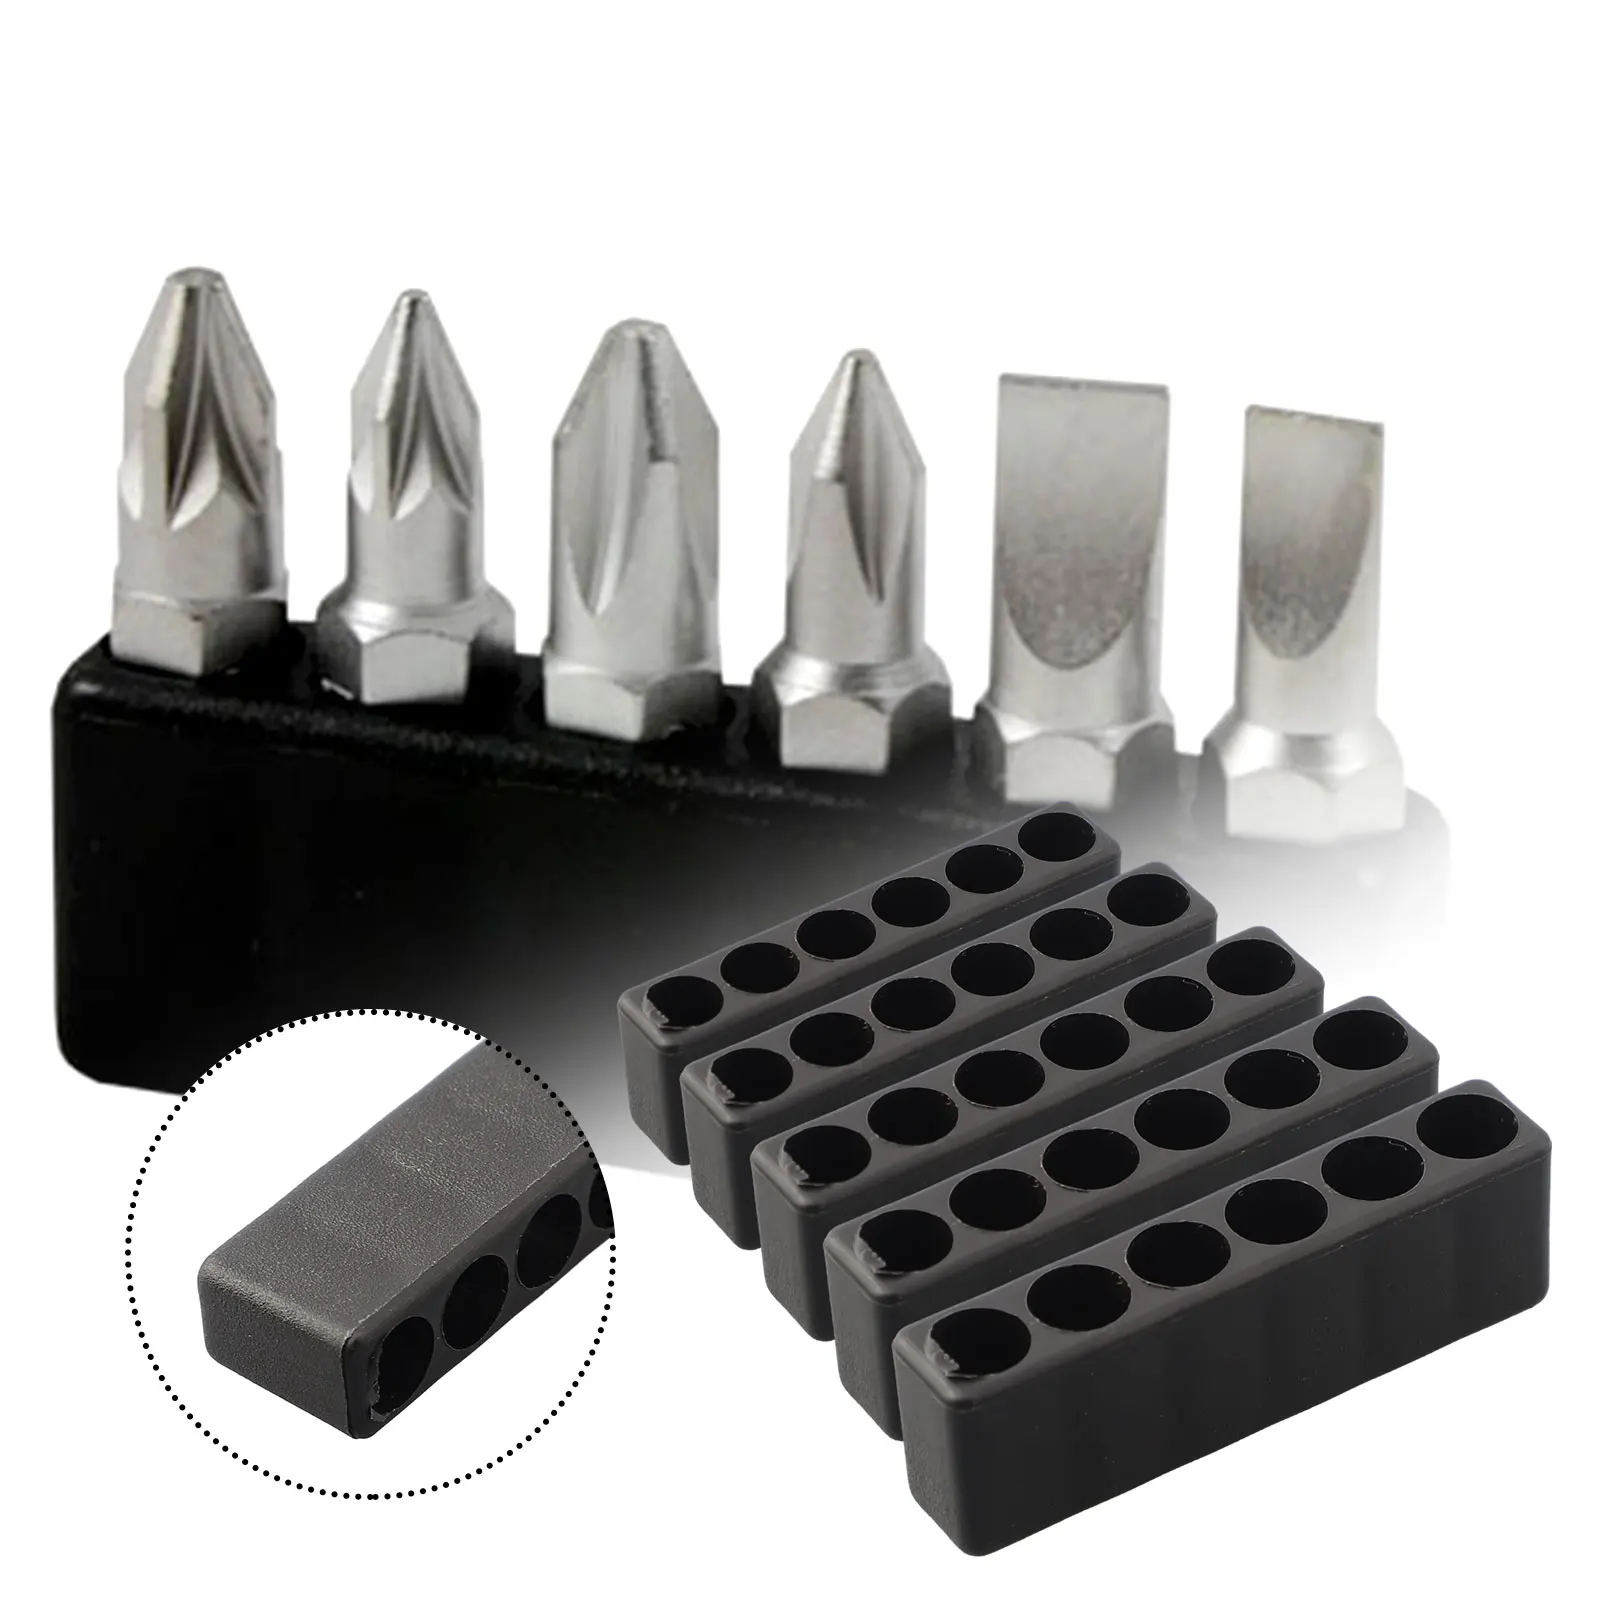 

Brightness Of Your Monitor Hole Screwdriver Bit Holder Bit Holder Hex Shank Pcs Bit Holder Plastic Screwdriver